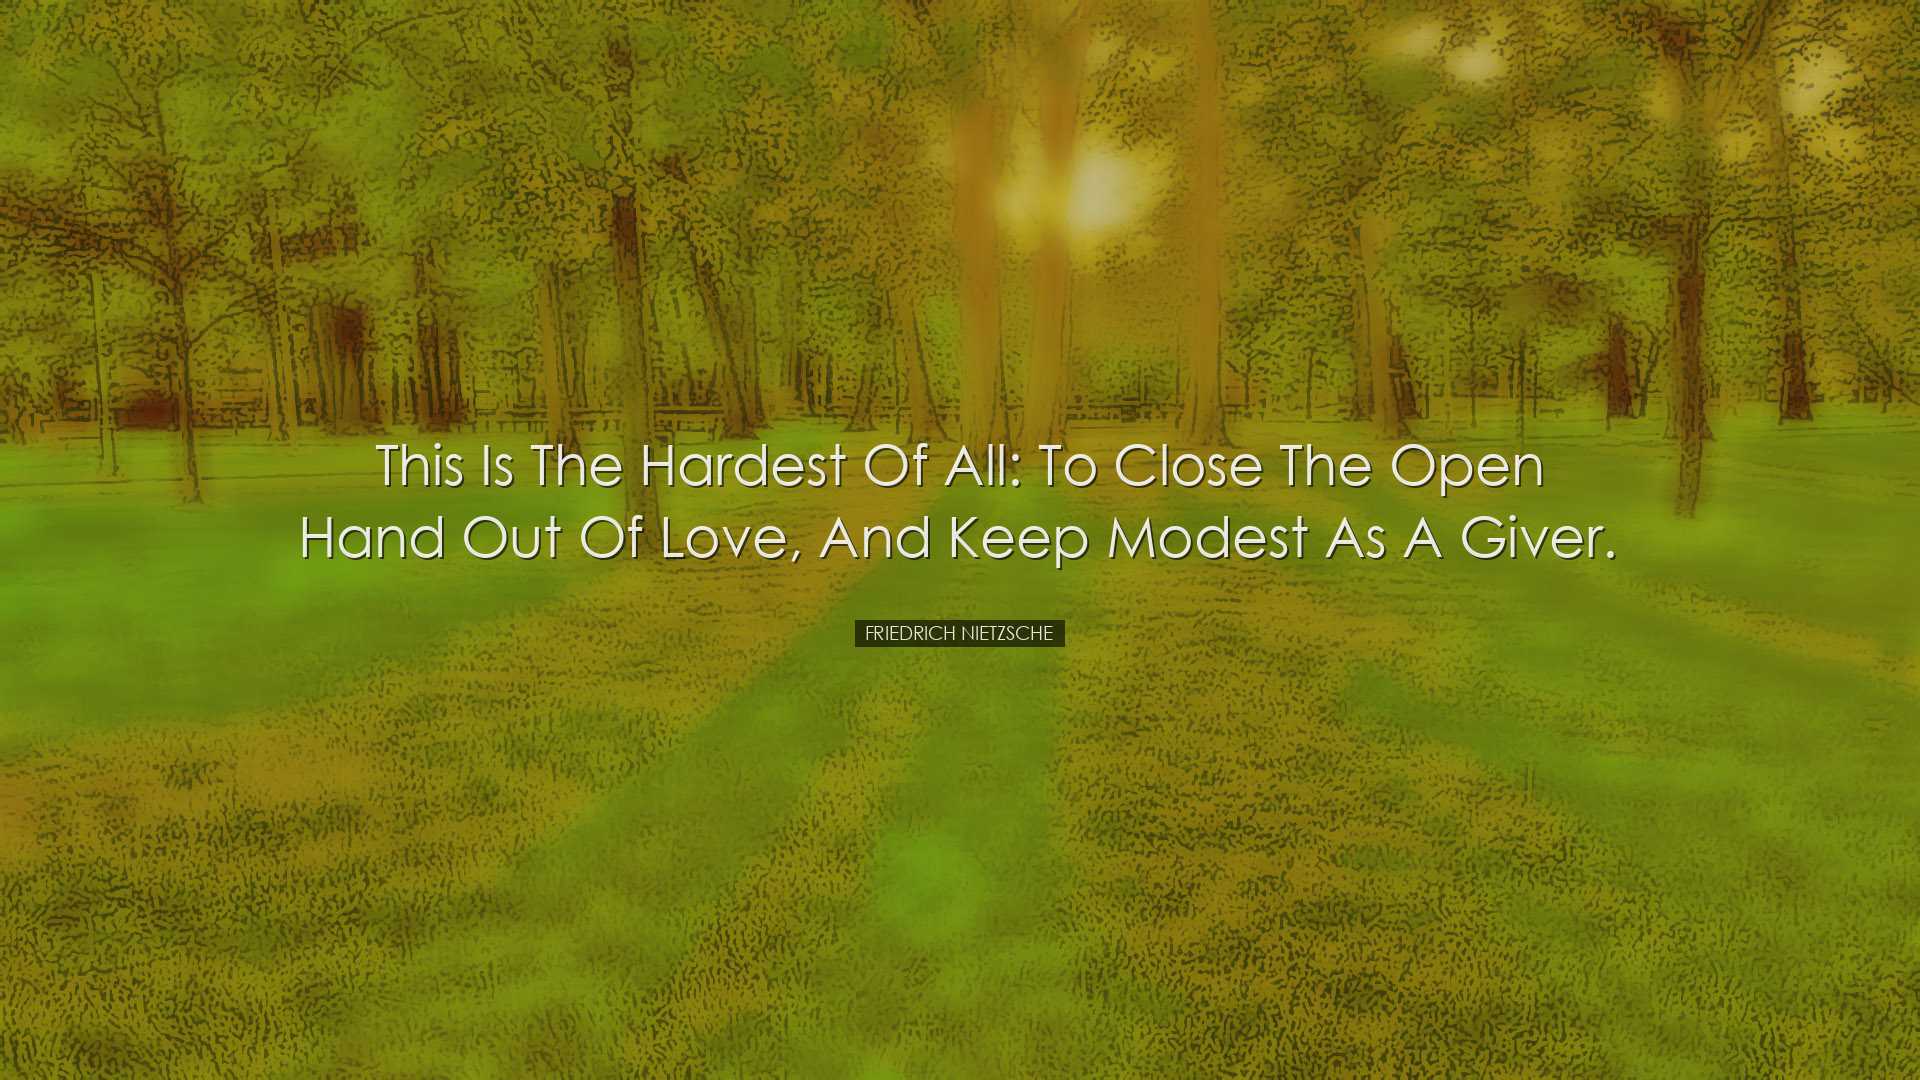 This is the hardest of all: to close the open hand out of love, an